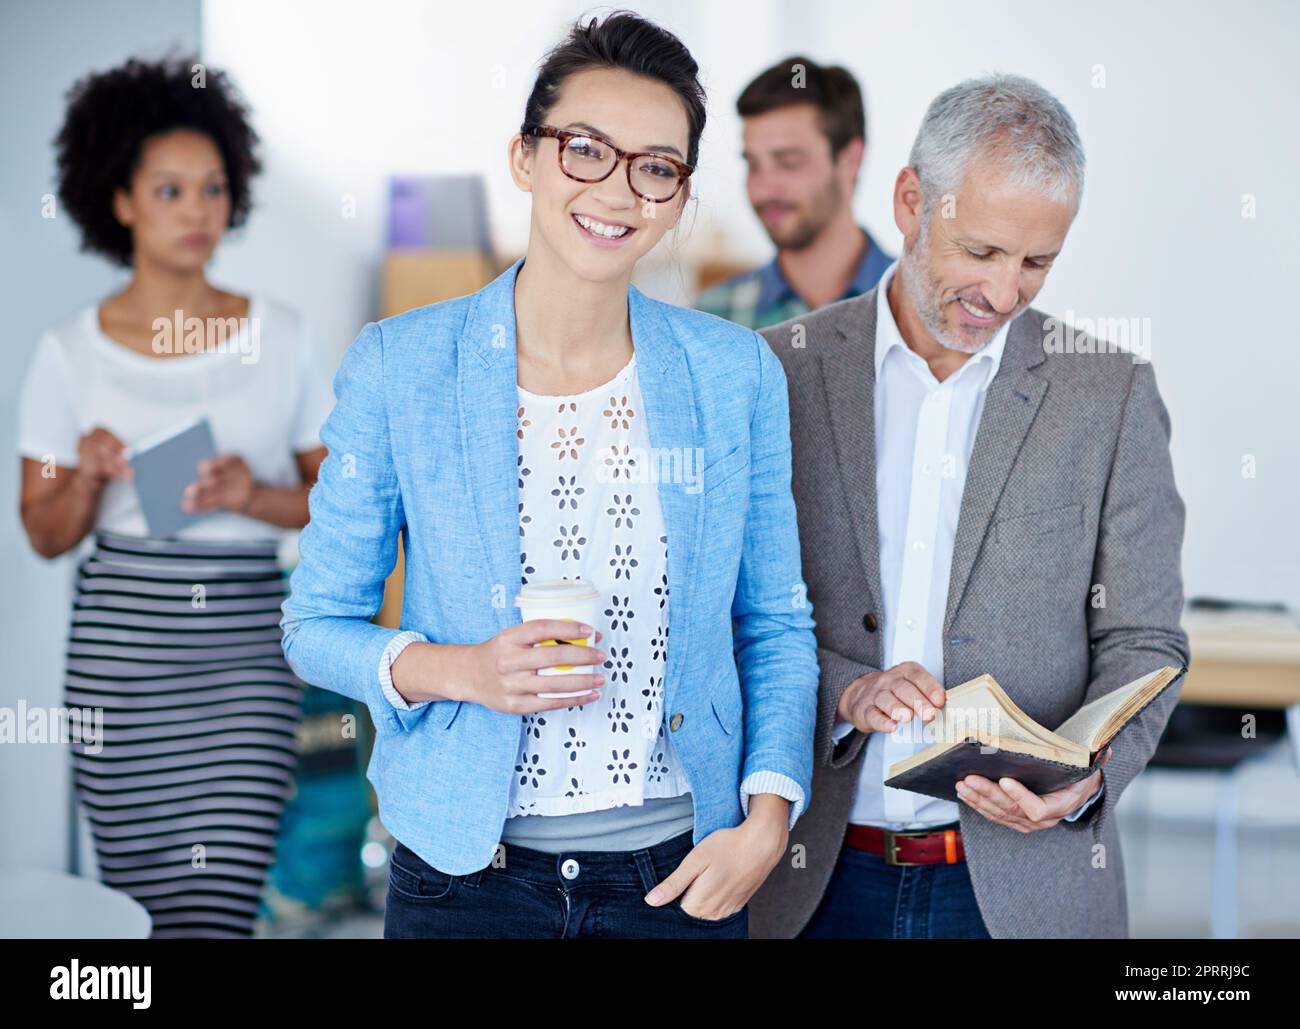 Theyre a multi-talented team. Portrait of a group of happy coworkers standing in an office. Stock Photo